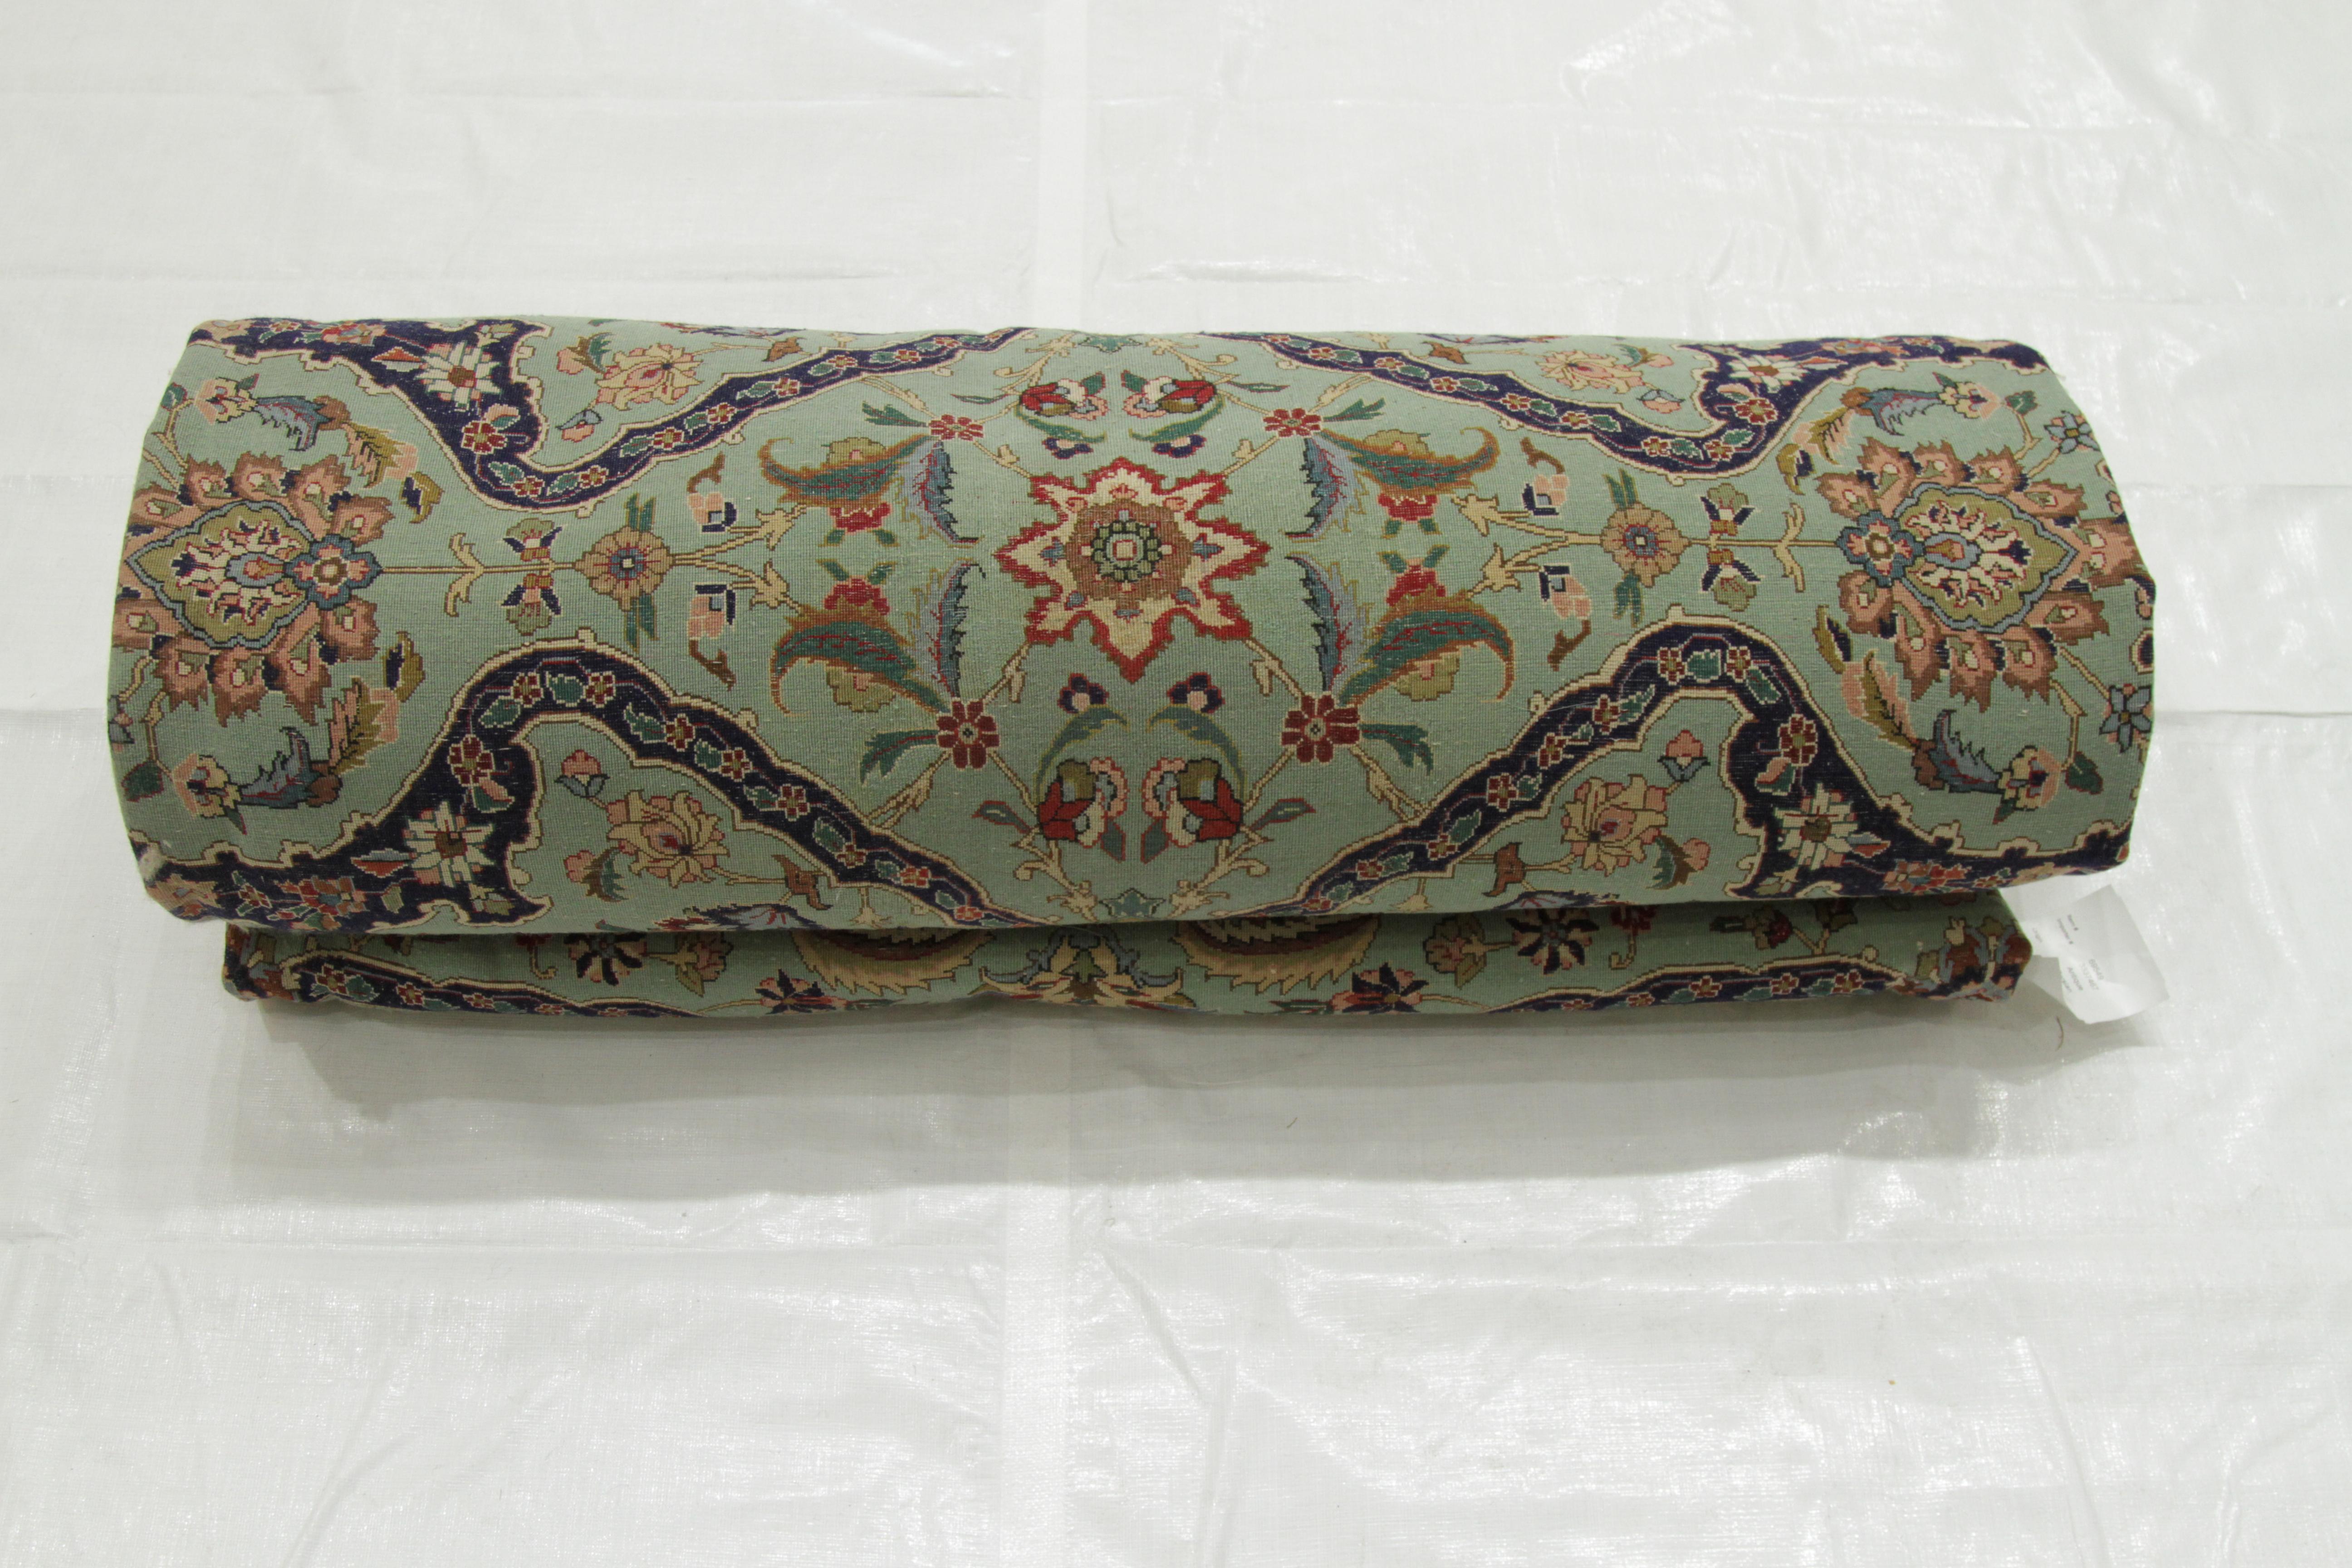 1970s Antique Tabriz Persian Rug with a Grand Blue and Red Floral Design For Sale 4